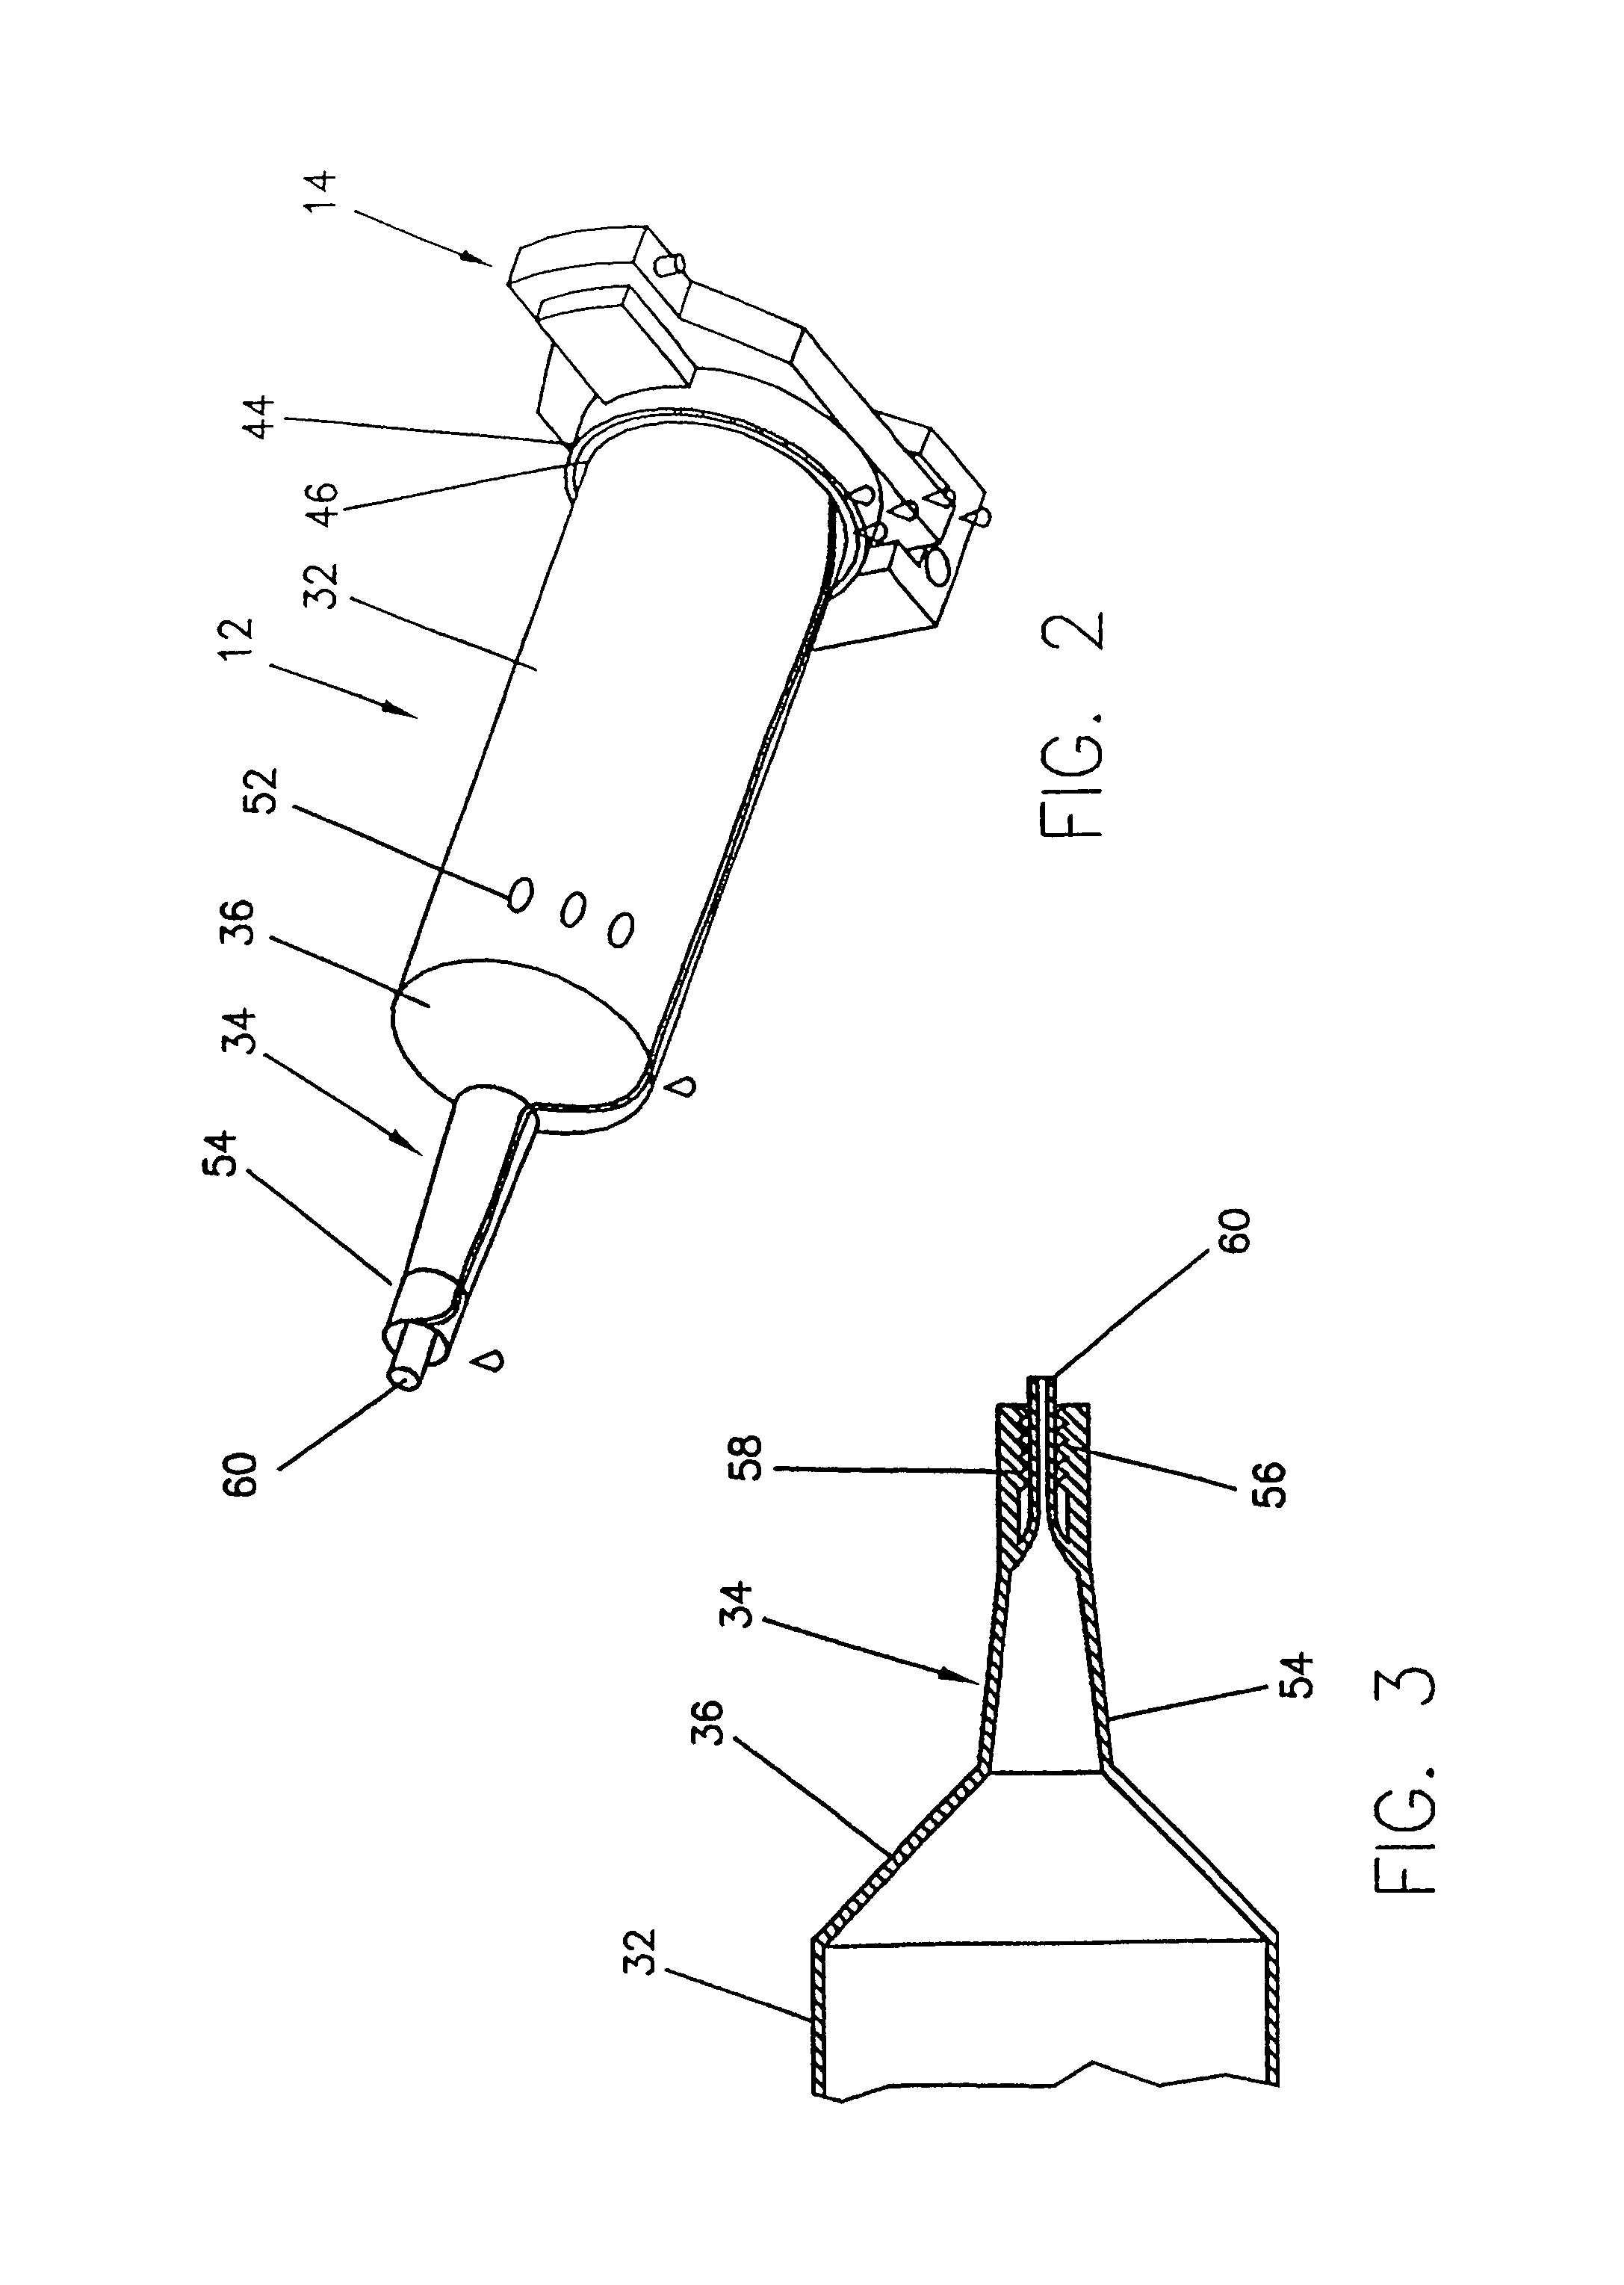 Front-loading syringe adapted to releasably engage a medical injector regardless of the orientation of the syringe with respect to the injector